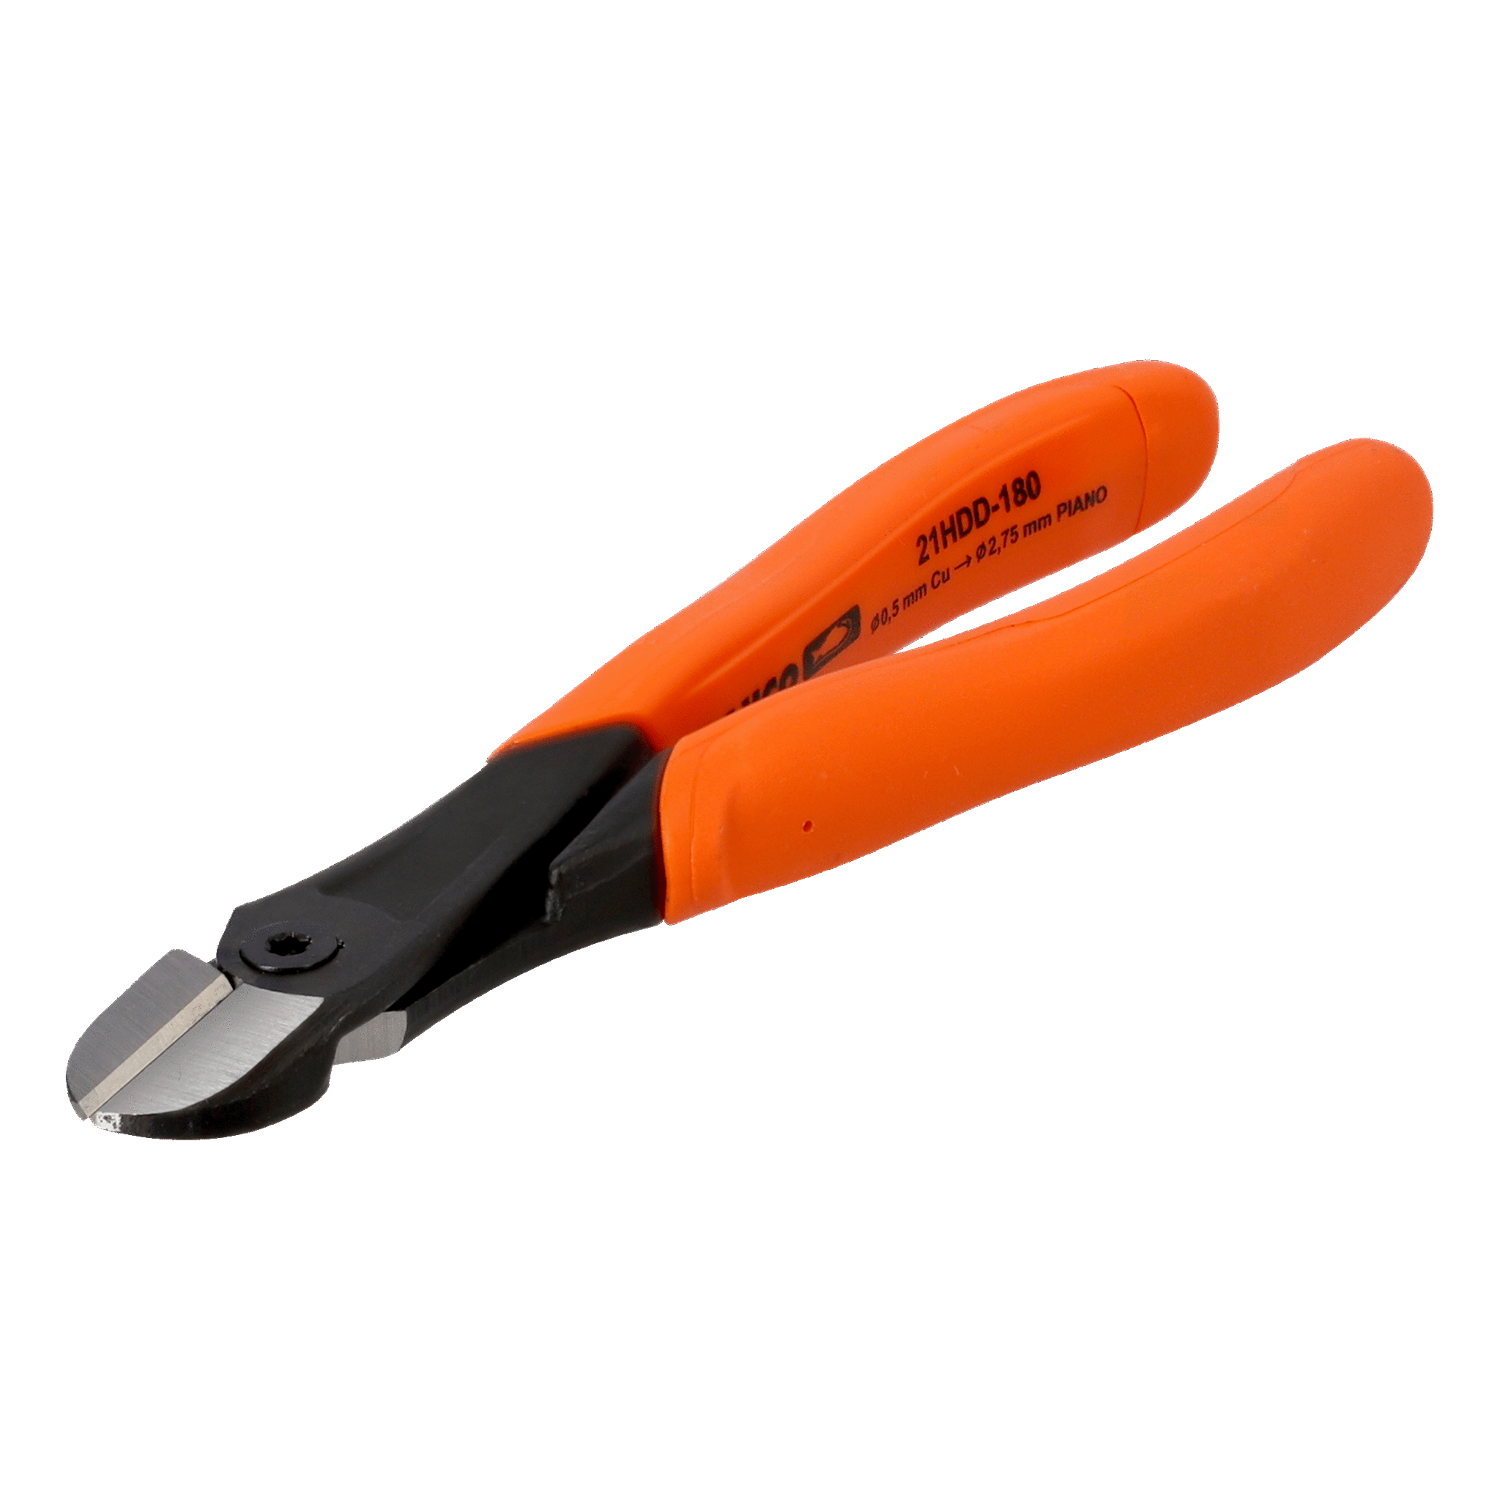 BAHCO 21HDD Heavy Duty Side Cutting Plier with Mono Material - Premium Cutting Plier from BAHCO - Shop now at Yew Aik.